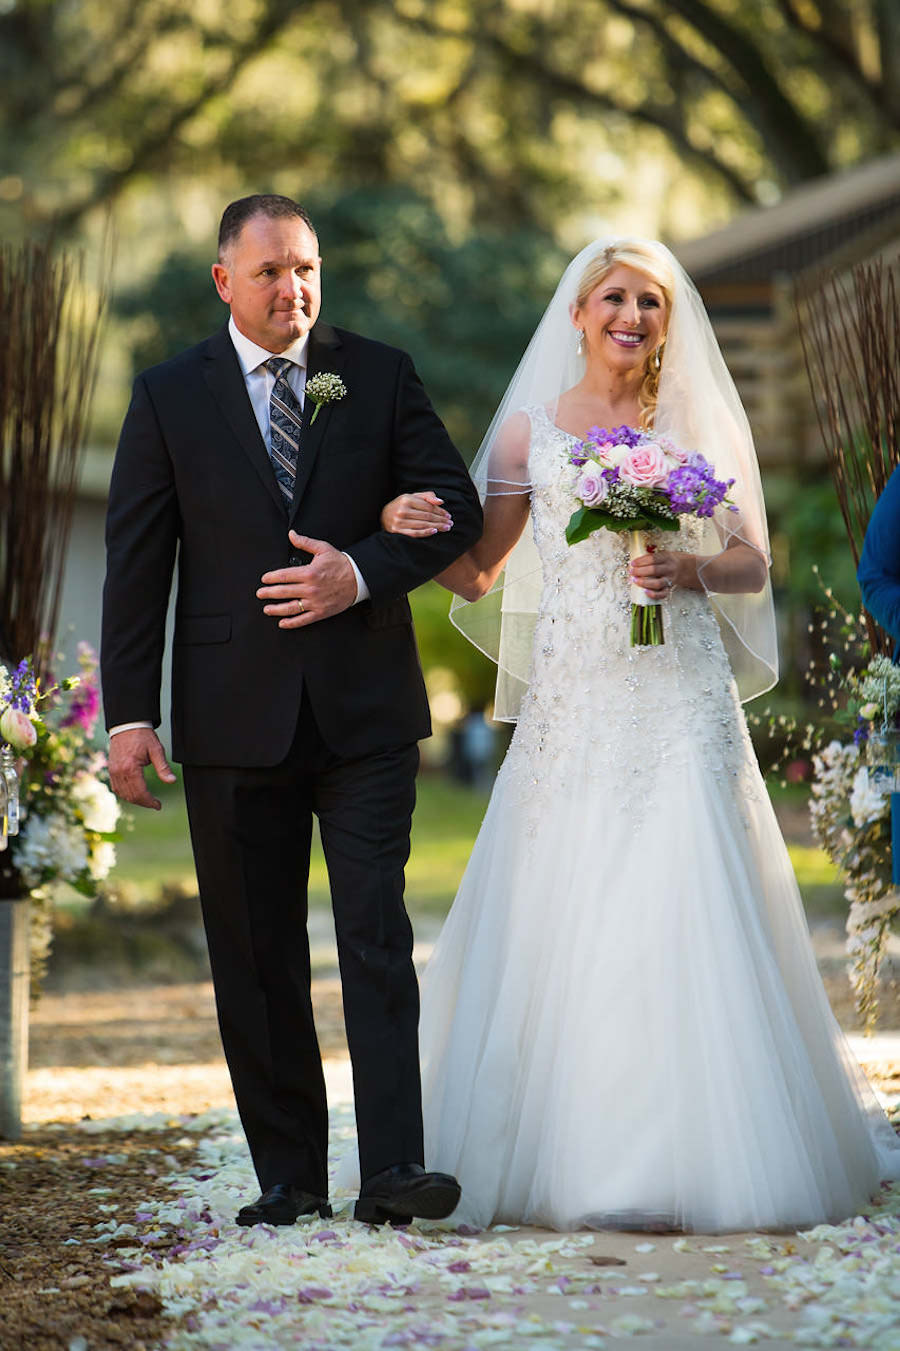 Outdoor Wedding Ceremony Bride and Dad Walking Down the Aisle with Purple and Pink Bouquet of Flowers | Plant City Wedding Photographer Jeff Mason Photography